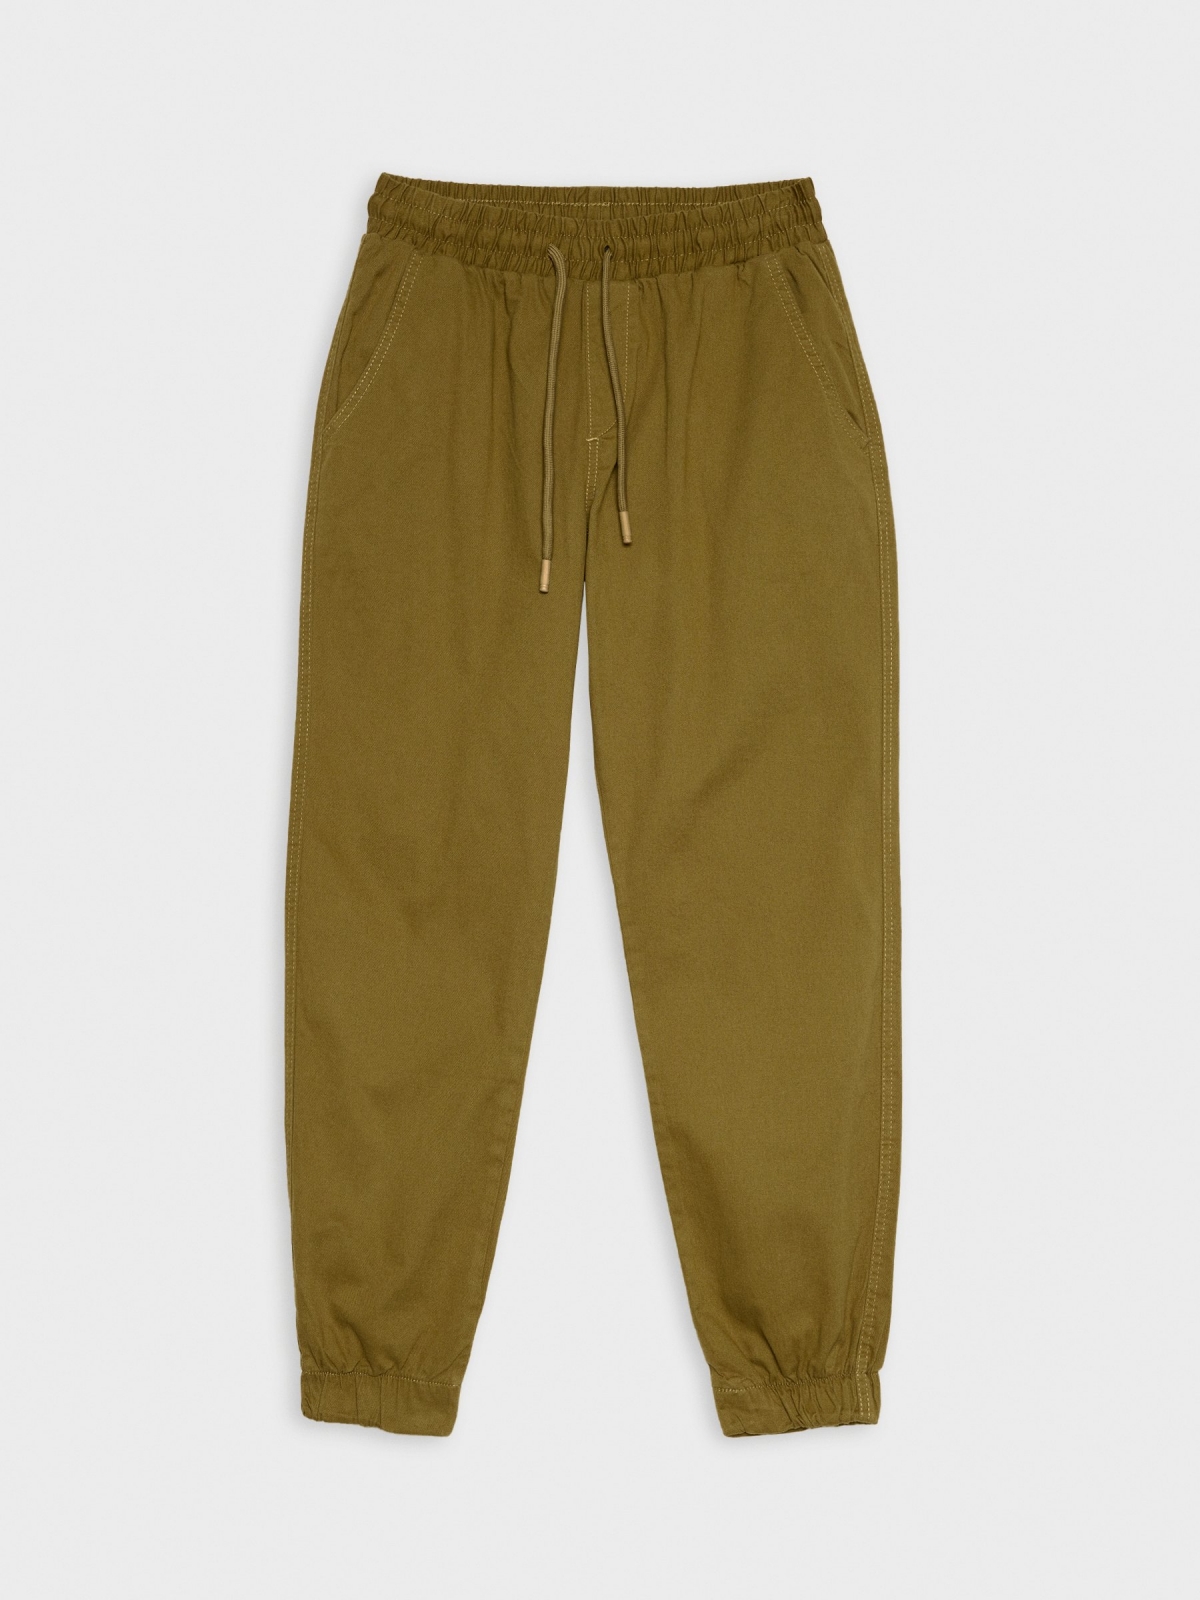  Twill joggers earth brown